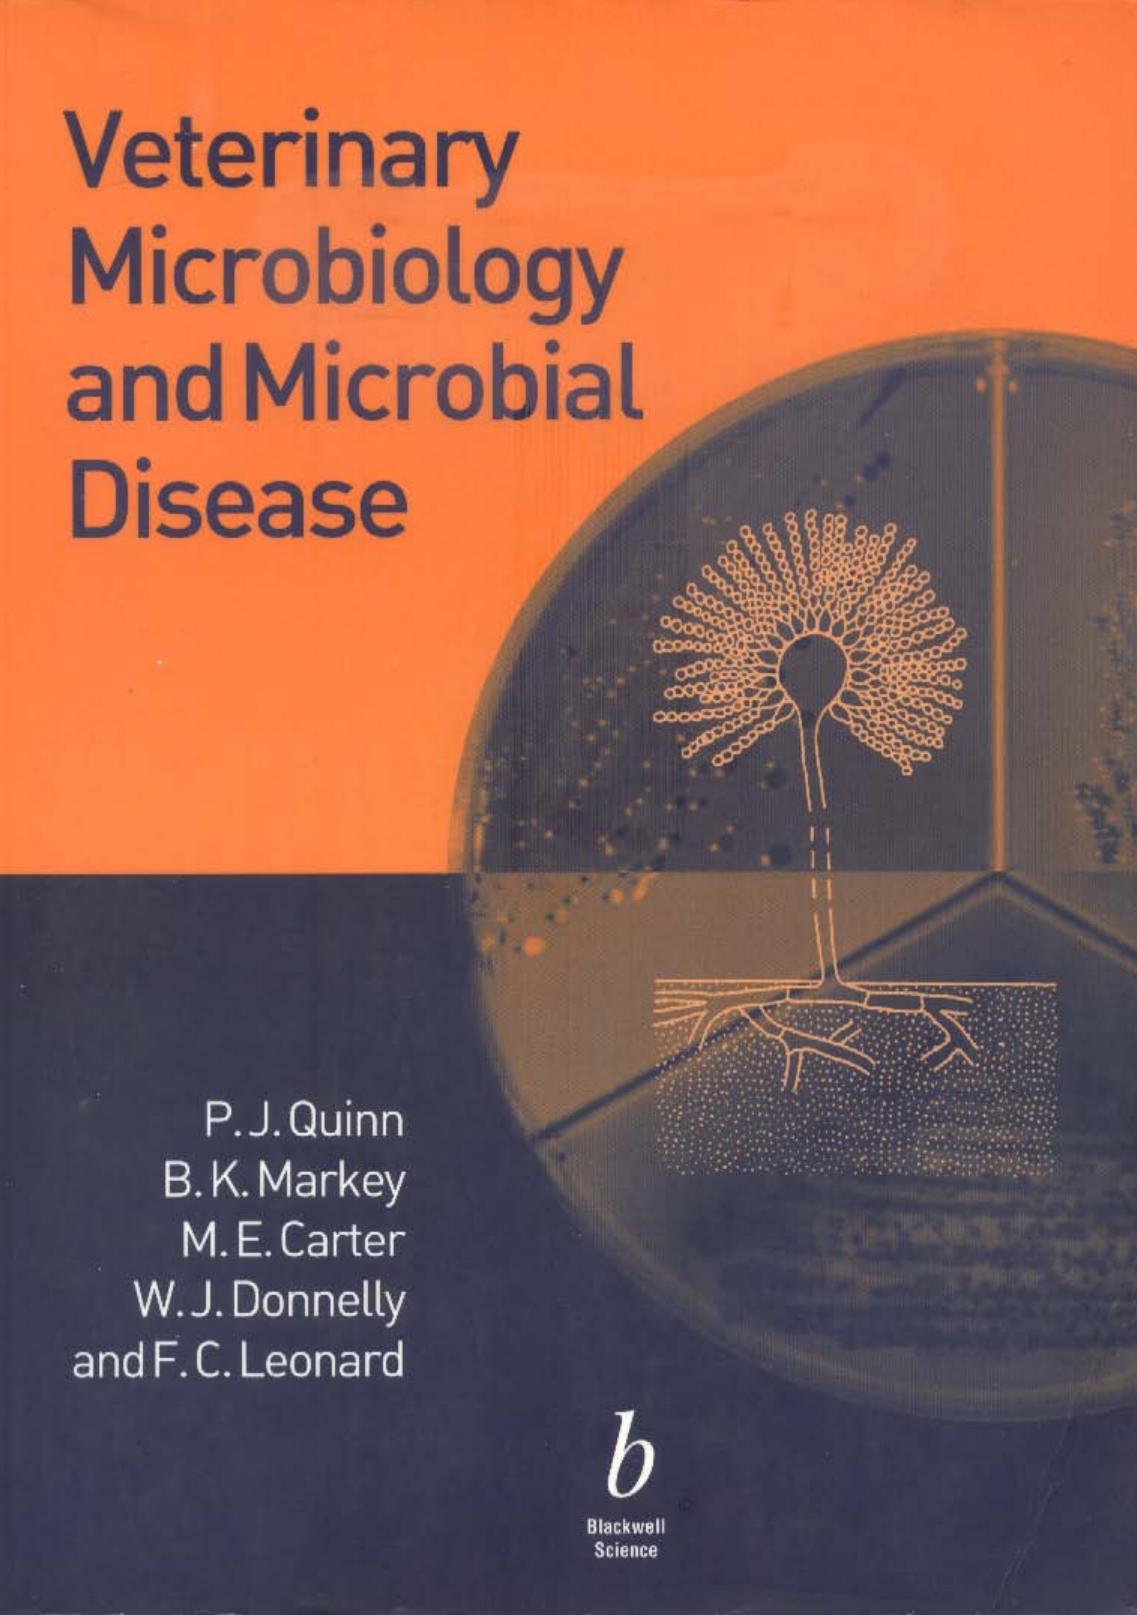 Veterinary Microbiology and Microbial Disease 2017